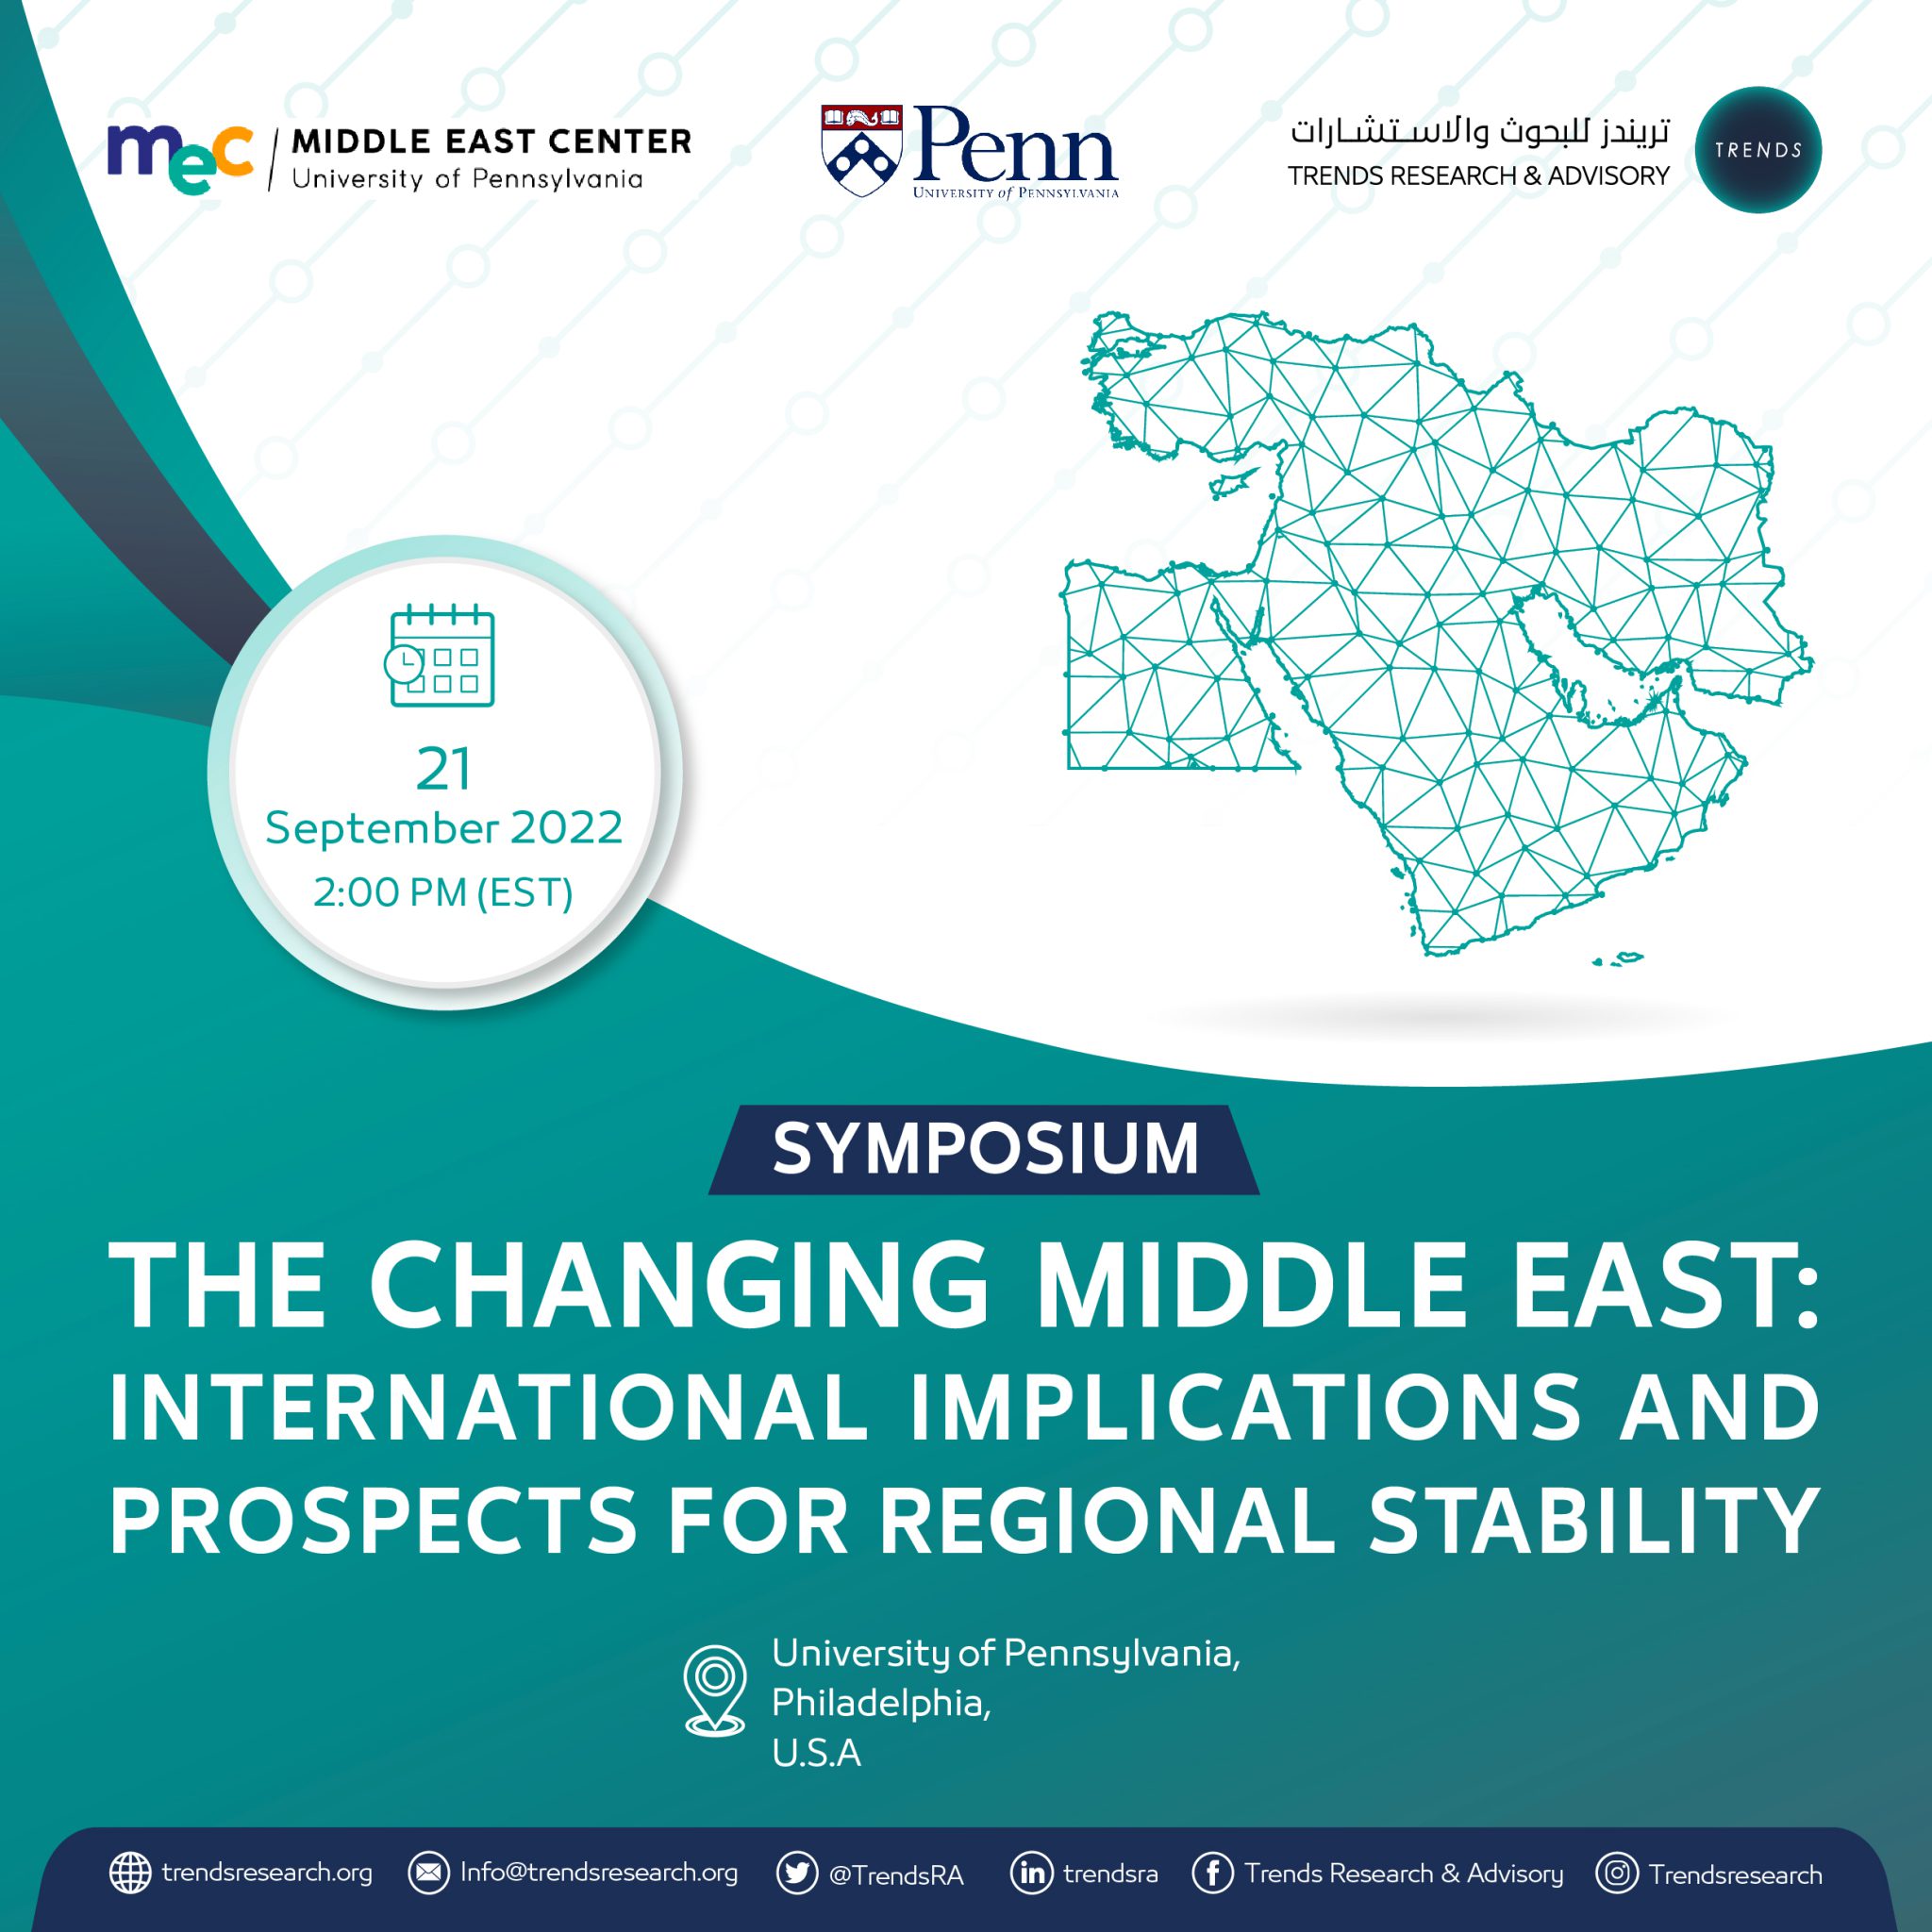 The Changing Middle East: International Implications and Prospects for Regional Stability